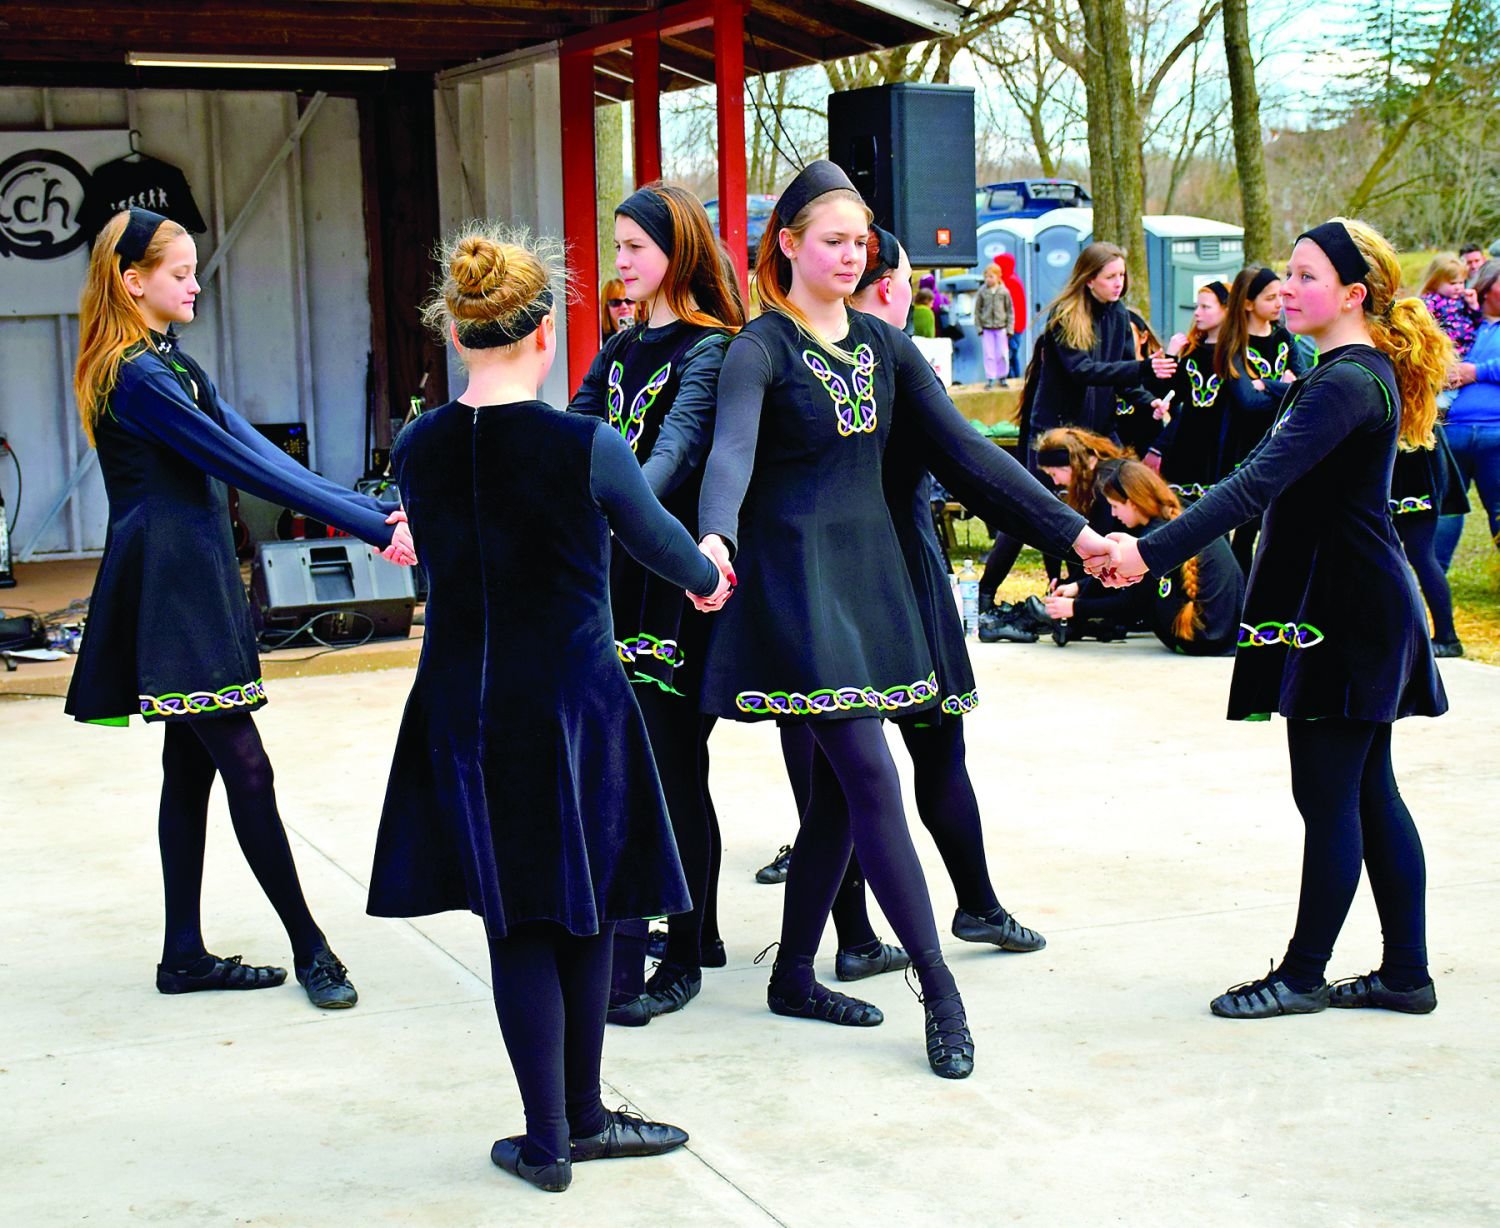 Students from the Fitzpatrick School of Irish dance perform. Photograph by Debby High.